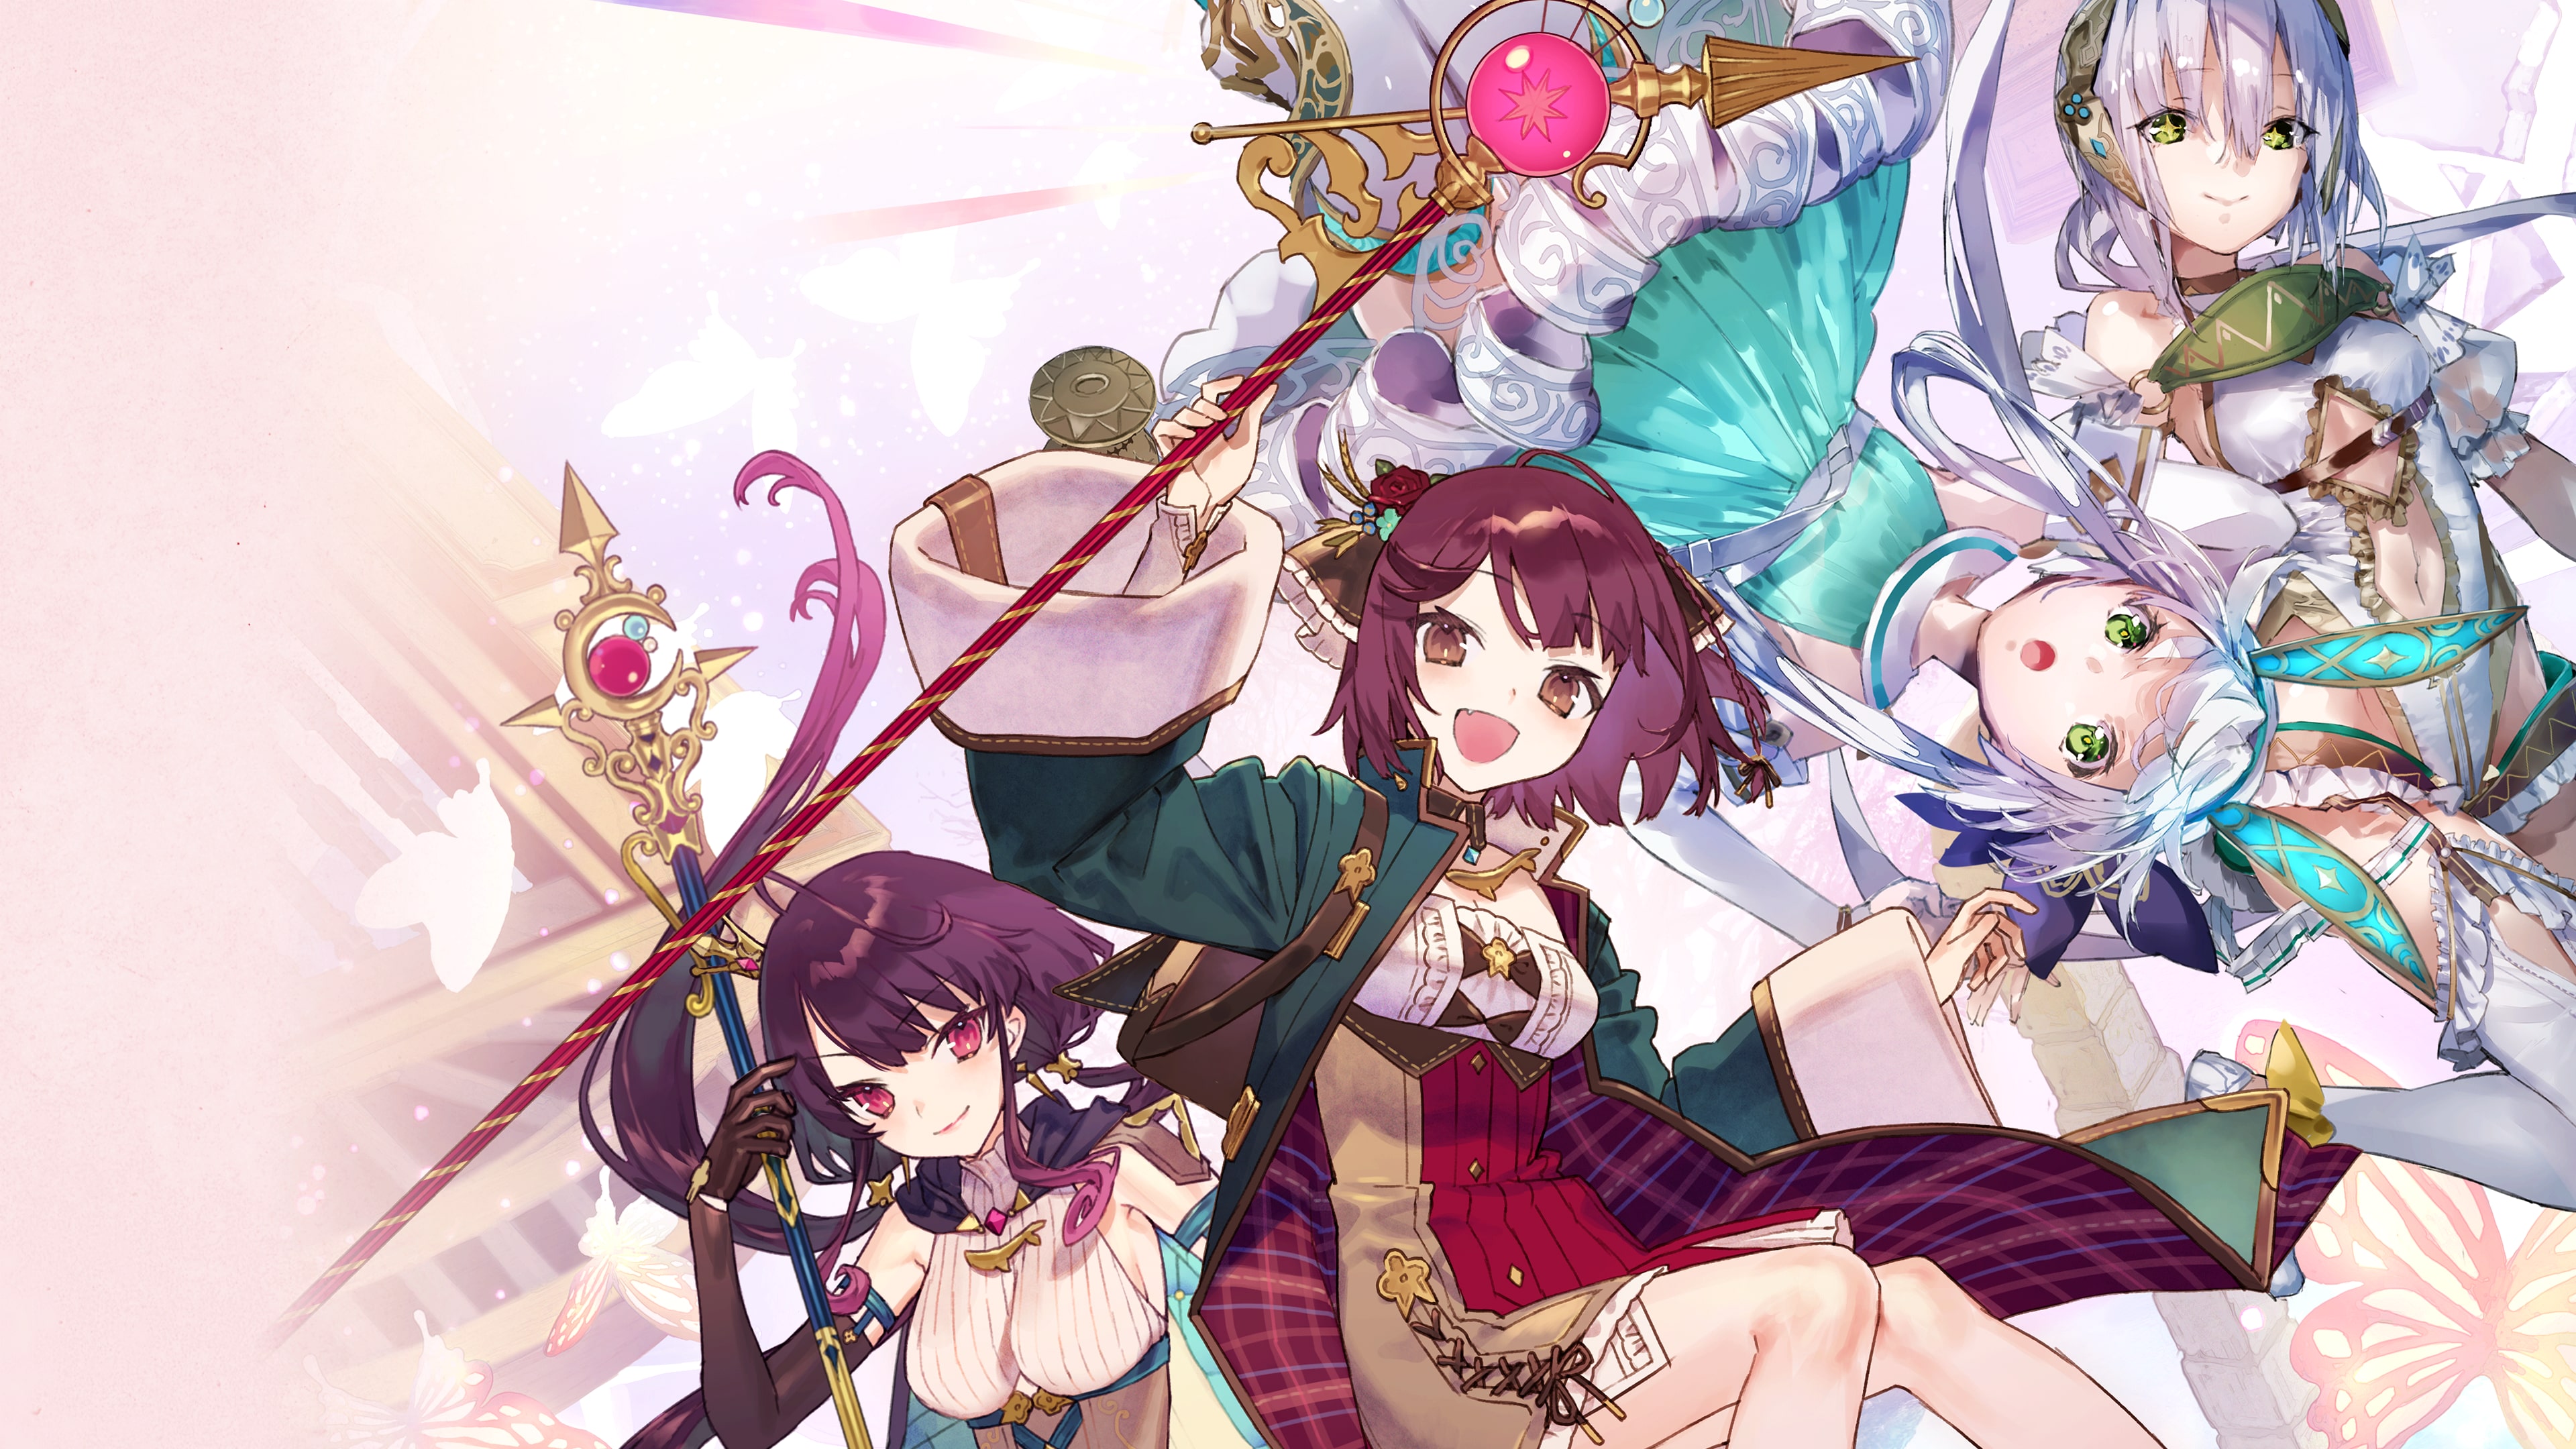 Atelier Sophie 2: The Alchemist of the Mysterious Dream Digital Deluxe Edition (Simplified Chinese, Korean, Traditional Chinese)